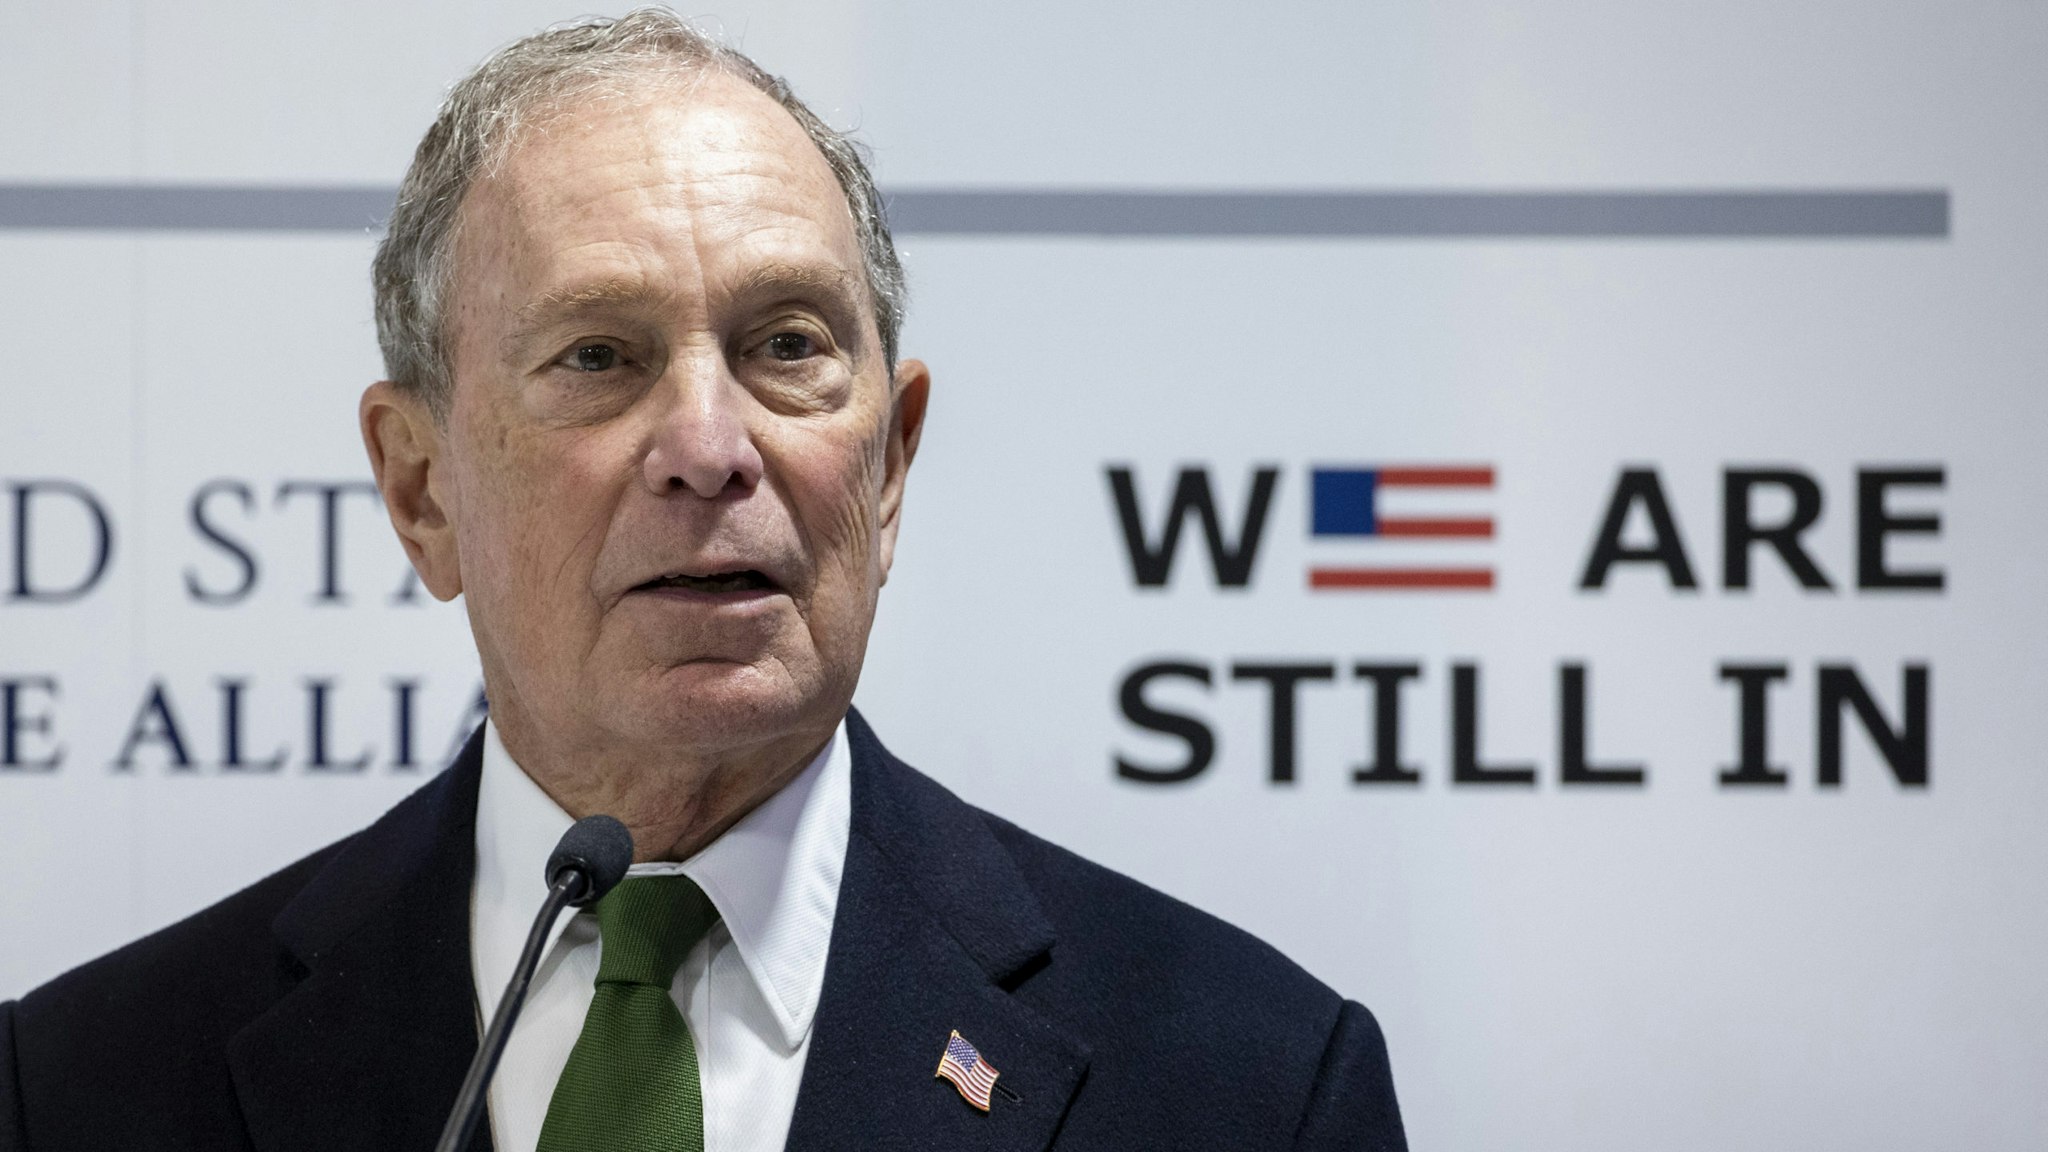 MADRID, SPAIN - DECEMBER 10: Democratic Presidential candidate and former New York City Mayor Michael Bloomberg speaks at a conference during the COP25 Climate Summit on December 10, 2019 in Madrid, Spain. The COP25 conference brings together world leaders, climate activists, NGOs, indigenous people and others for two weeks in an effort to focus global policy makers on concrete steps for heading off a further rise in global temperatures.